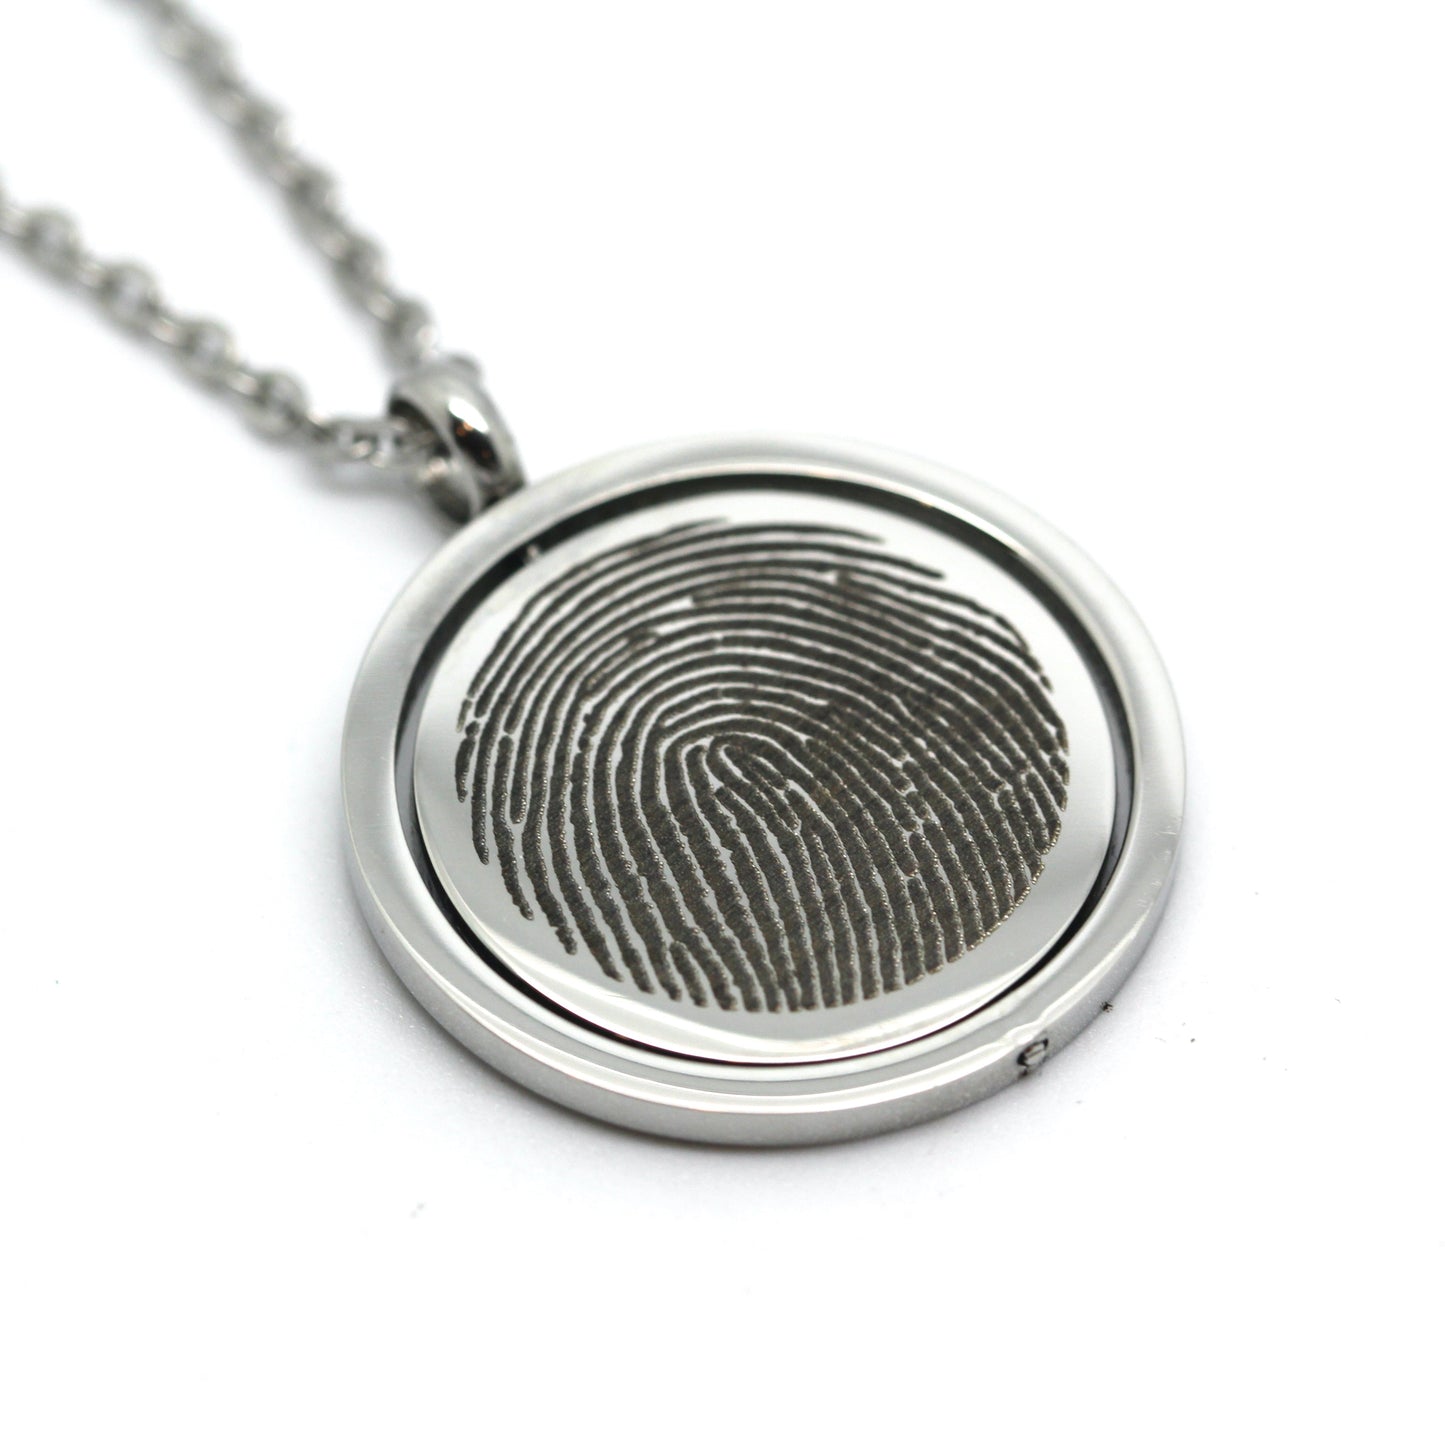 Custom Engraved Reversible Pendant - Engraved with actual Paw, Nose, Handwriting or Fingerprint